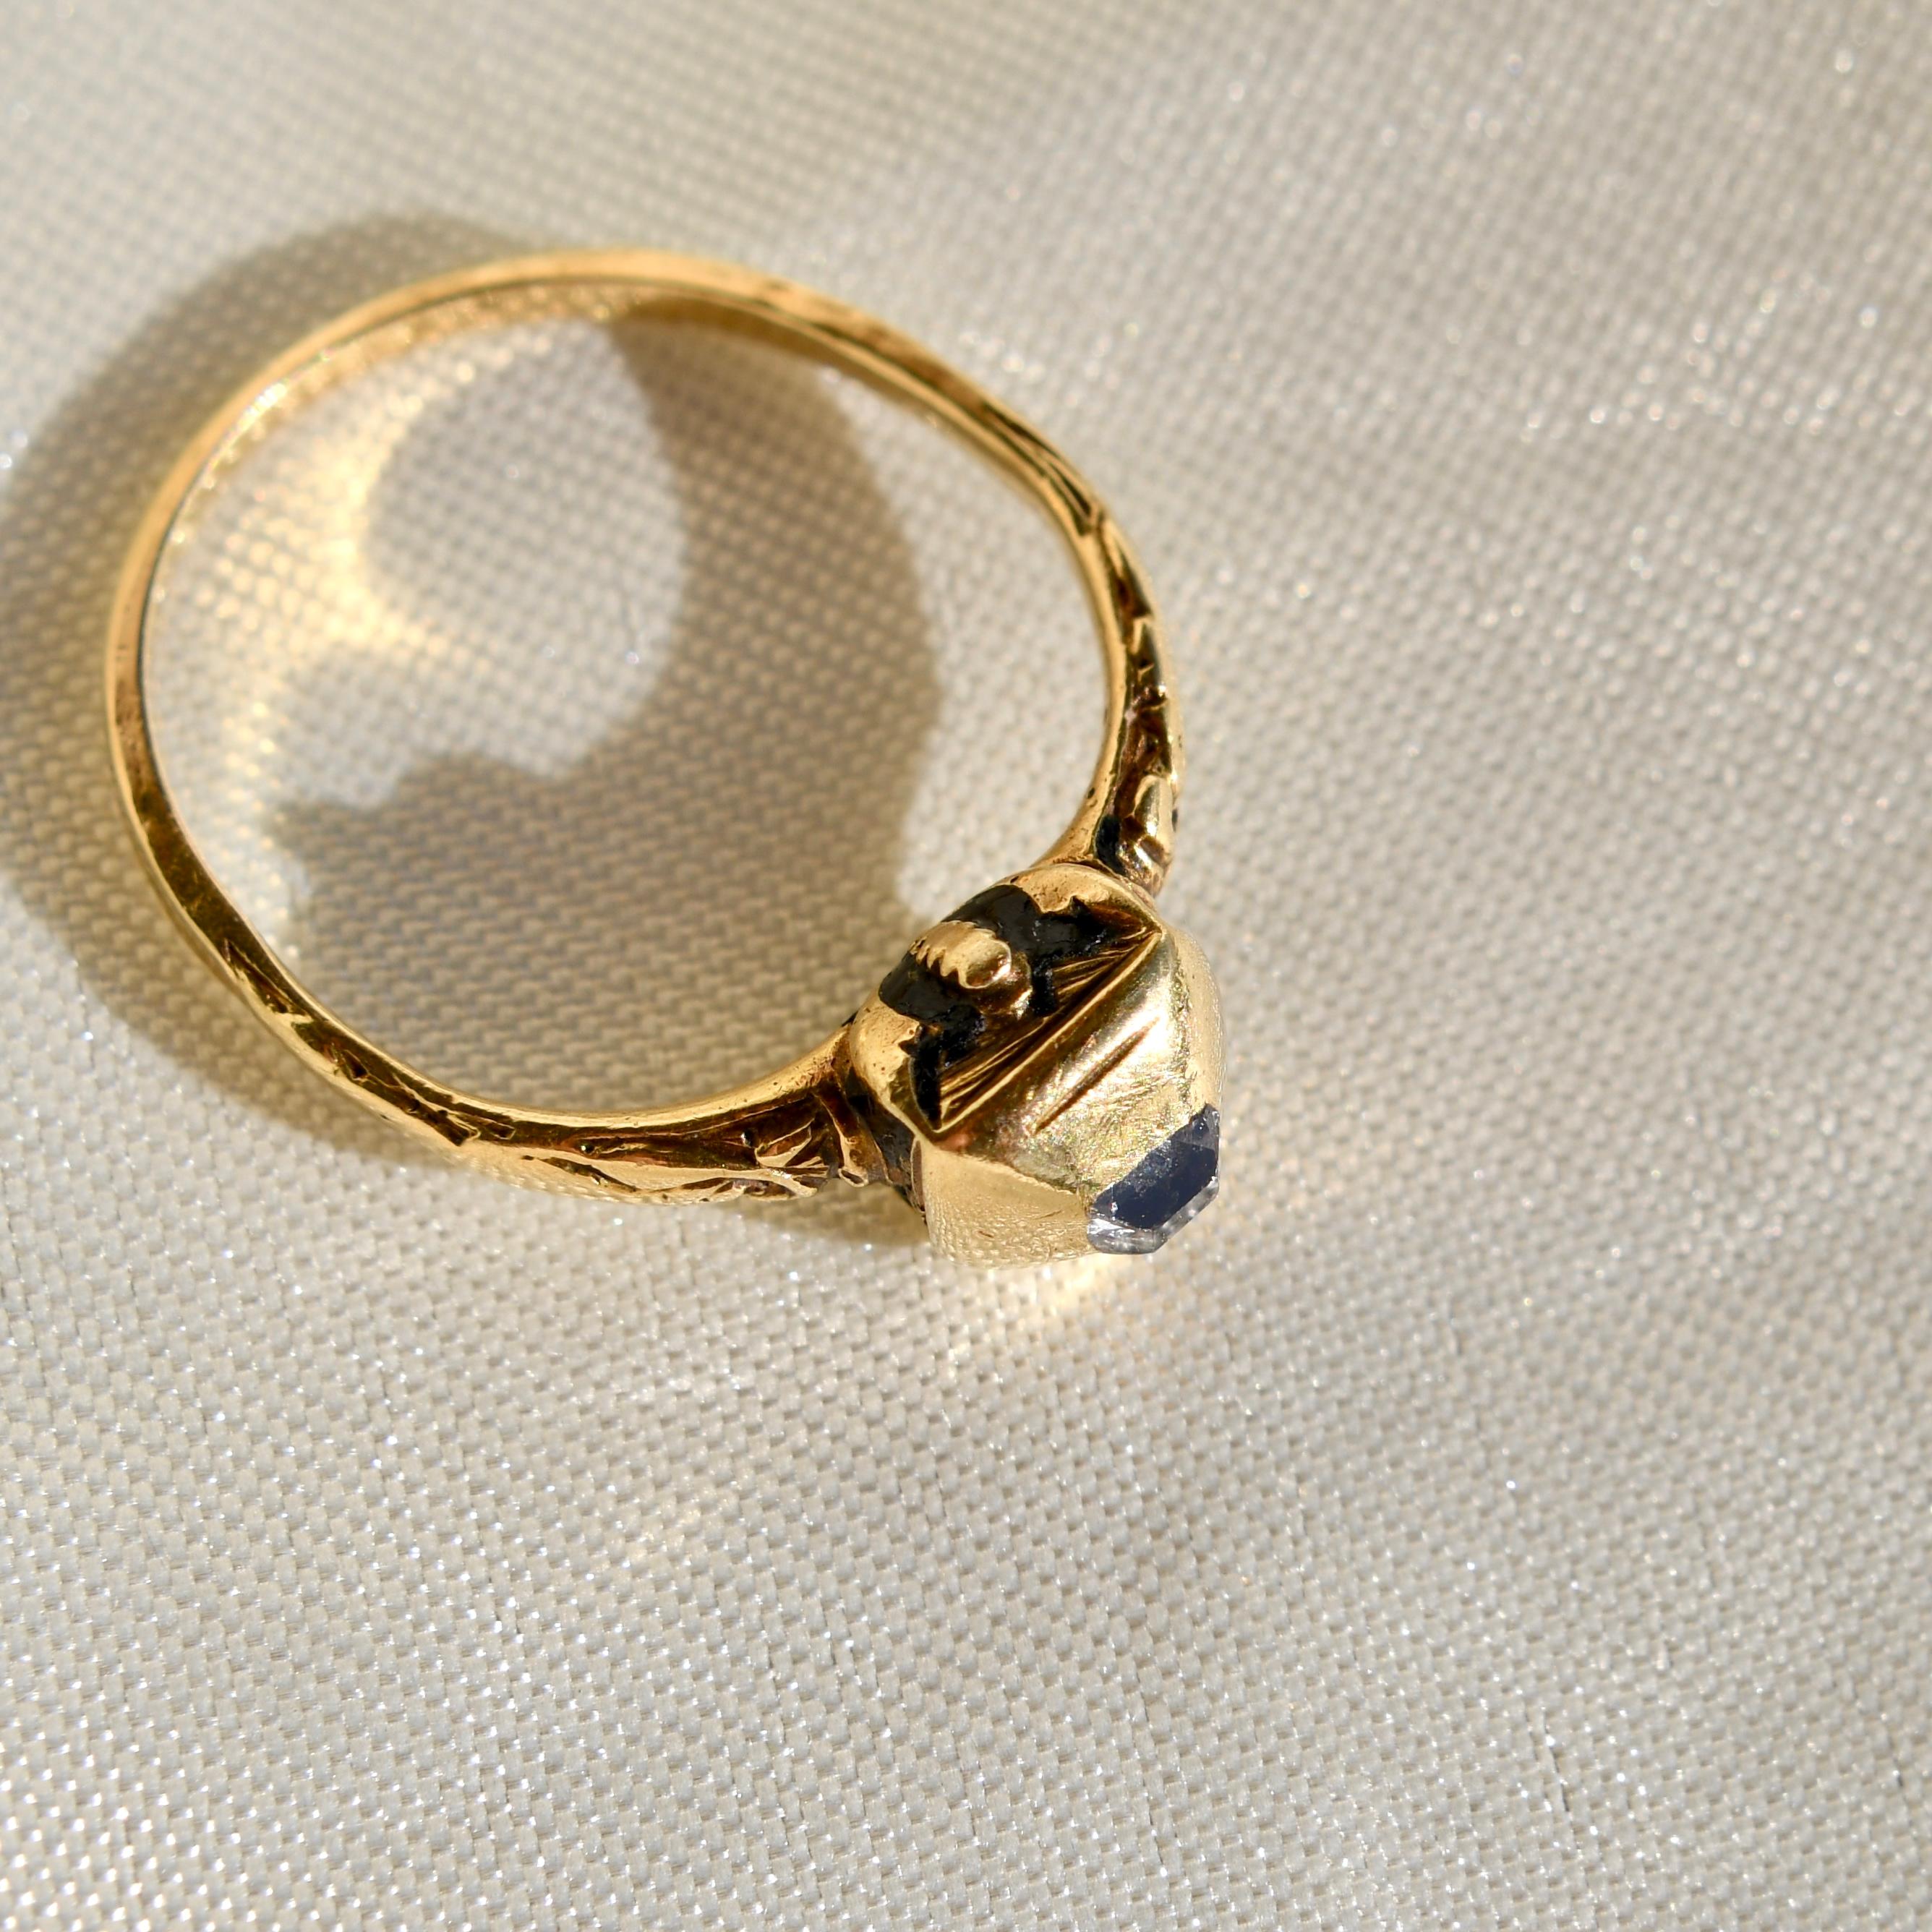 Renaissance gold and diamond ring with enamel, 16th century  For Sale 3